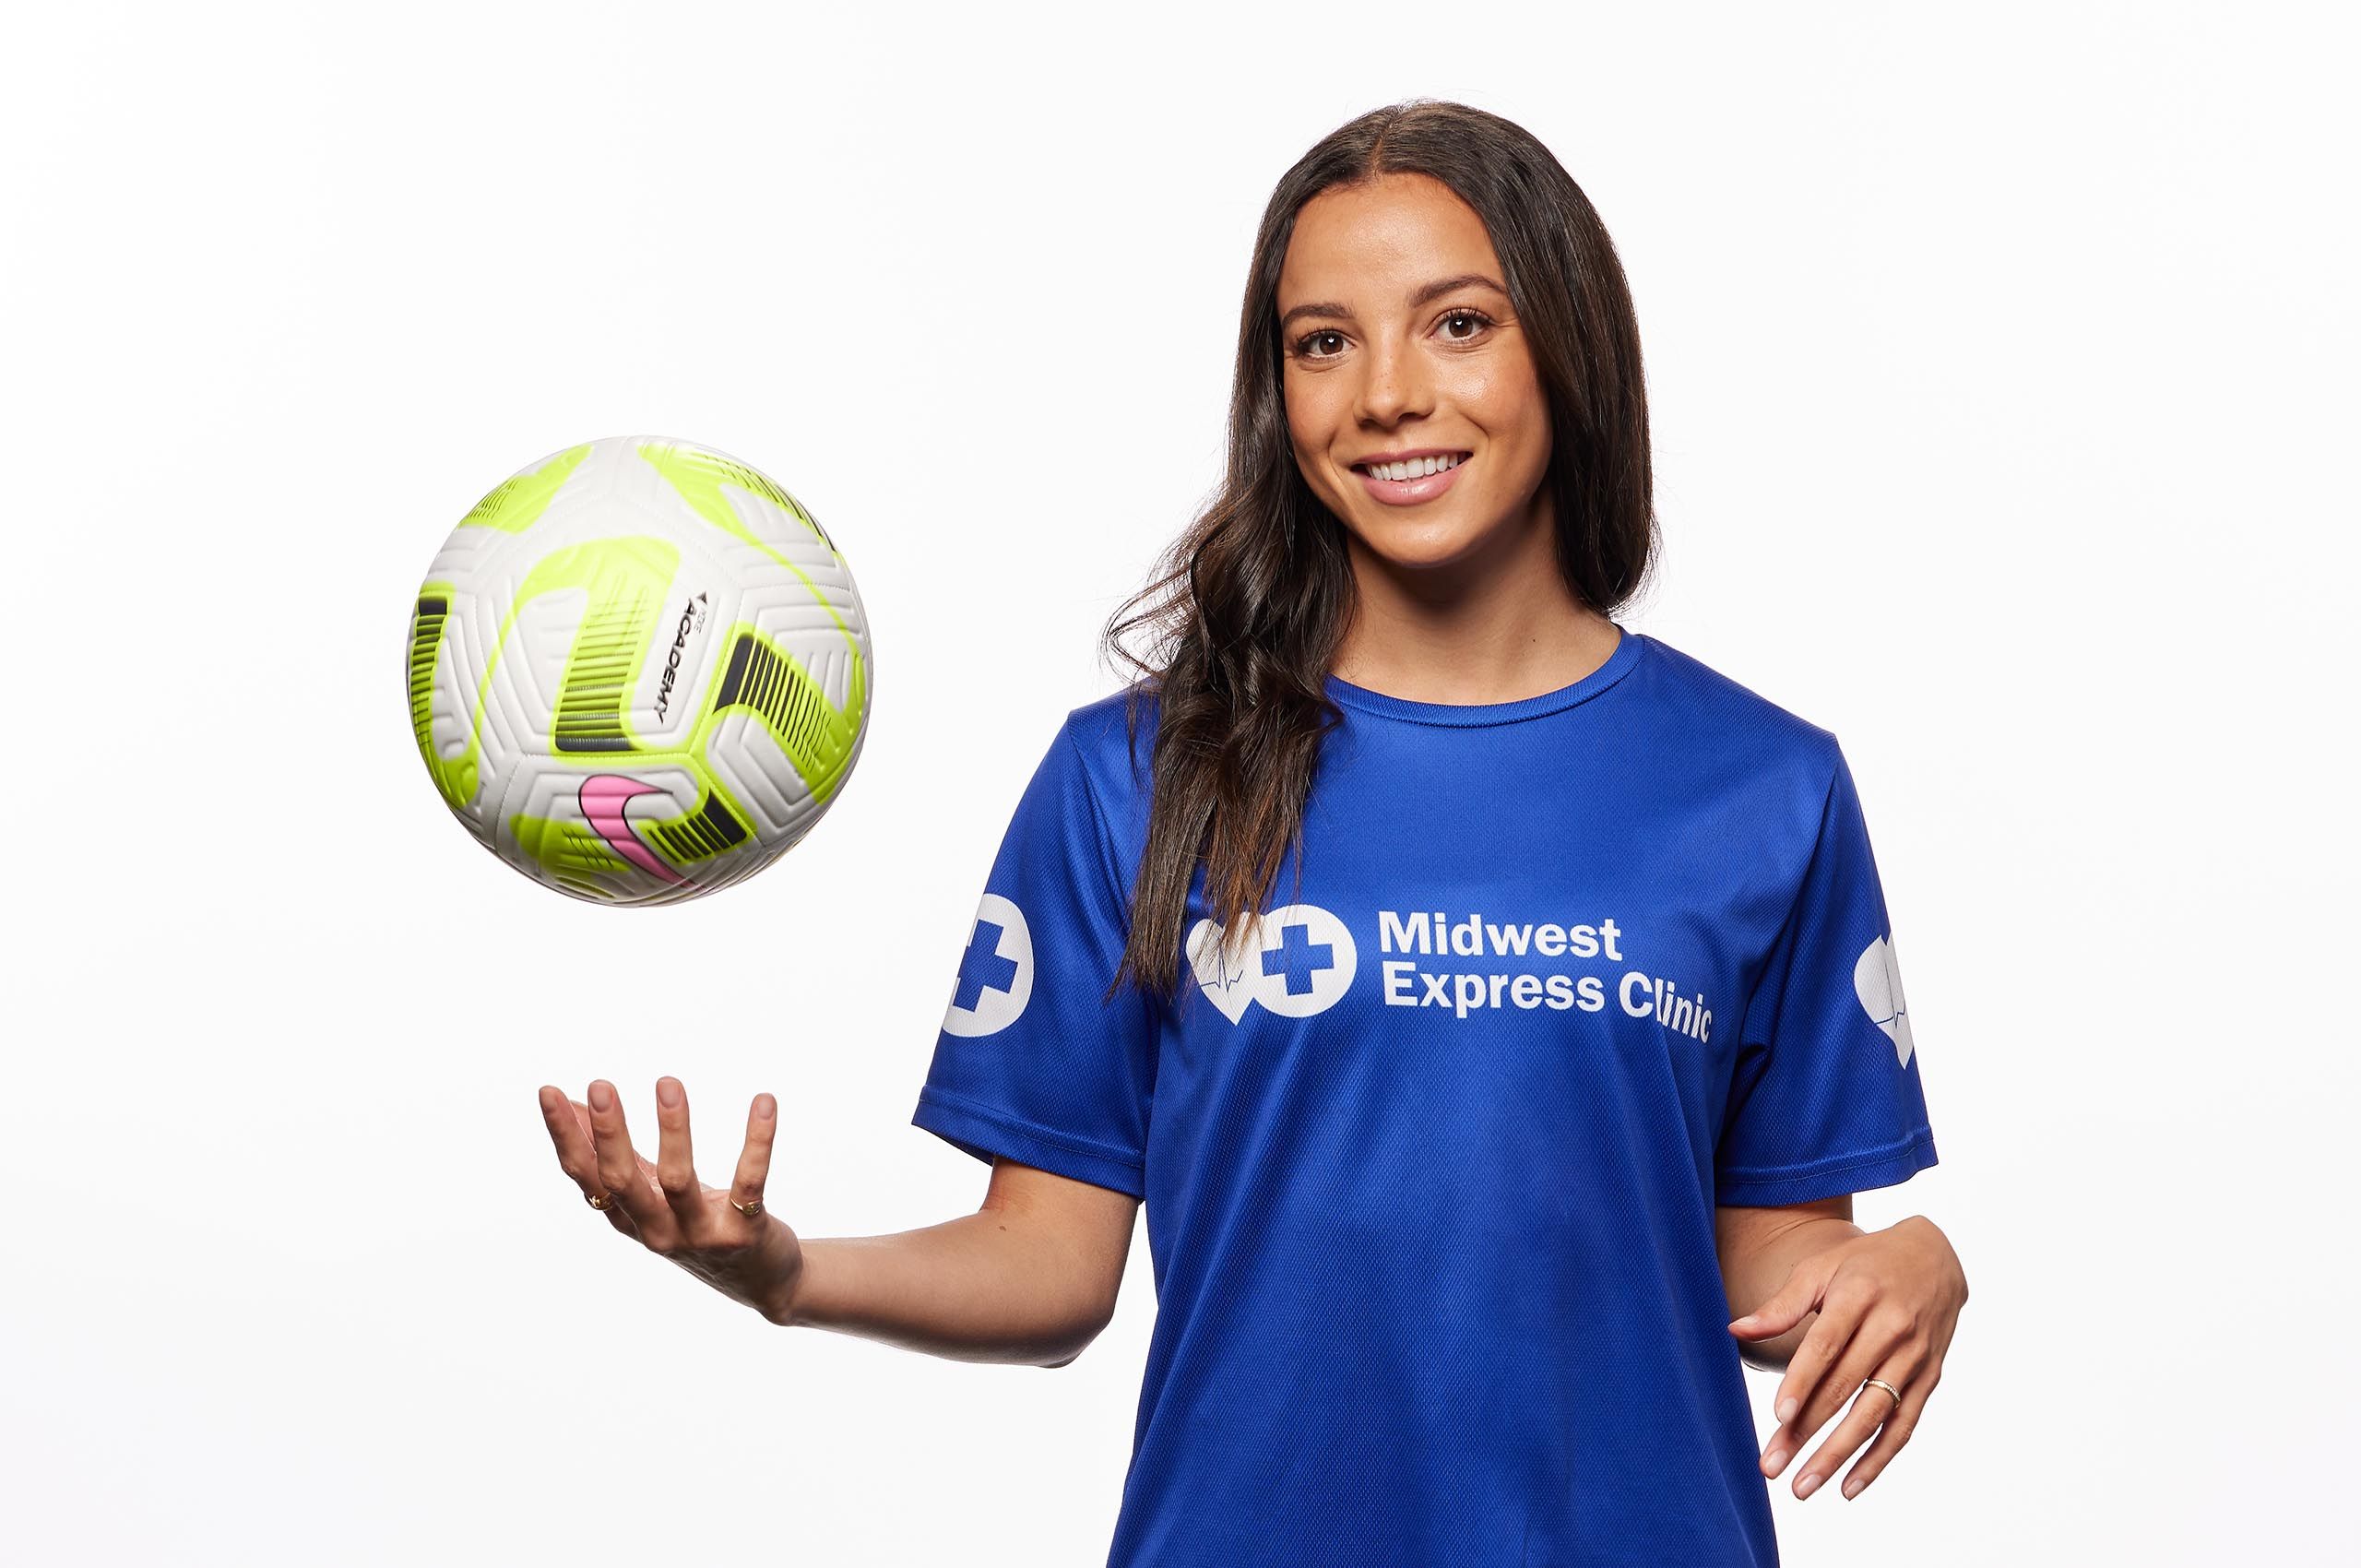 Mallory Pugh Swanson, by Chicago advertising photographer Jeff Schear